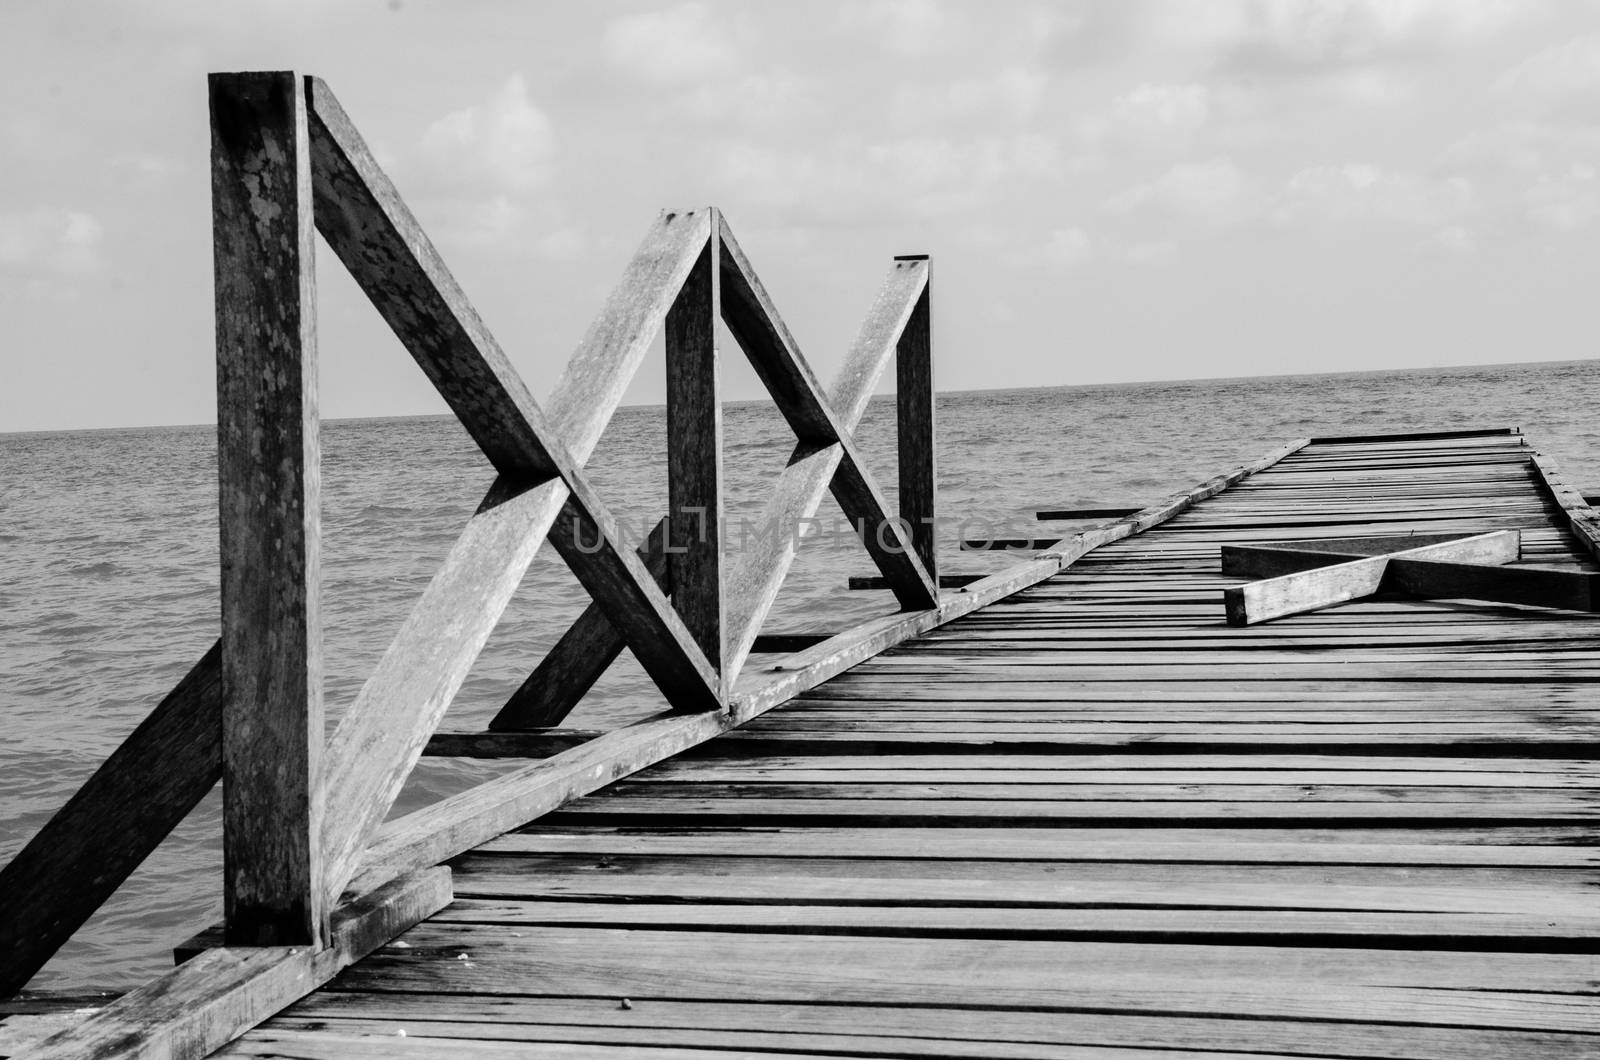 Wooden pier on the sea background by Vanzyst